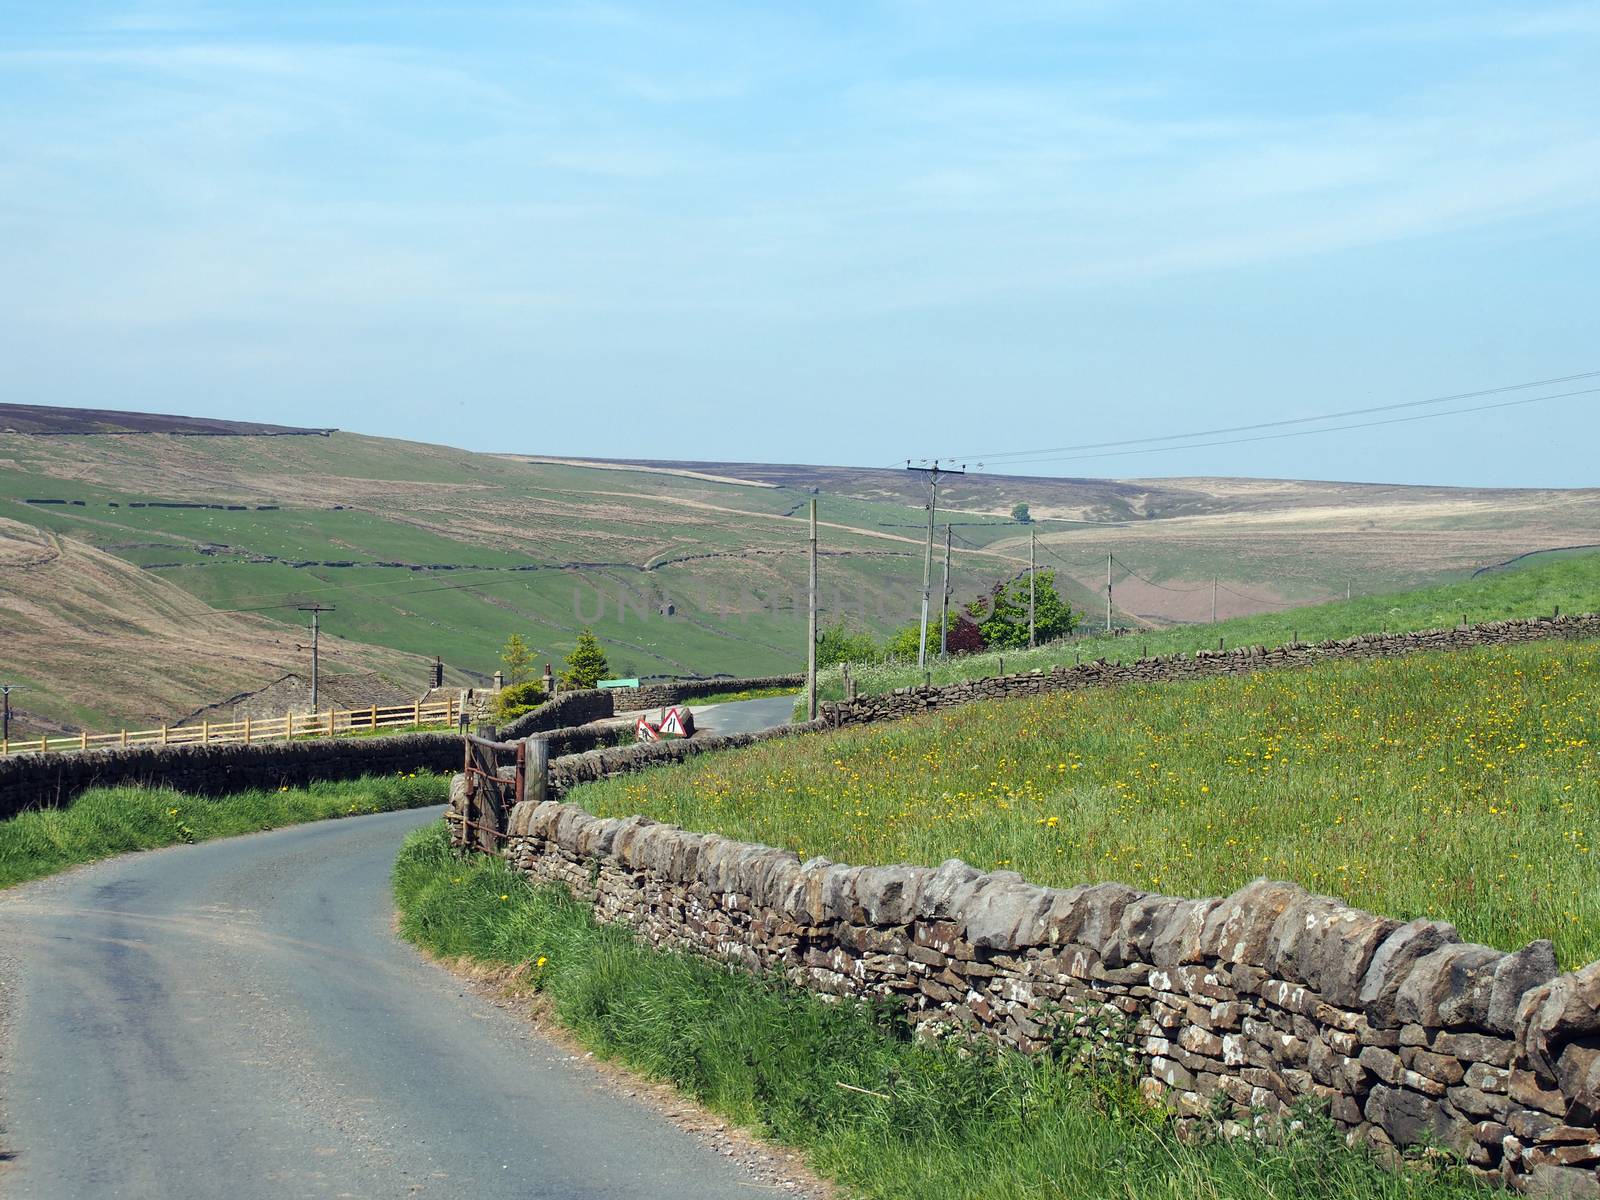 a narrow country lane surrounded by dy stone walls in a sunlit rural hilly landscape on the old howarth road in calderdale west yorkshire